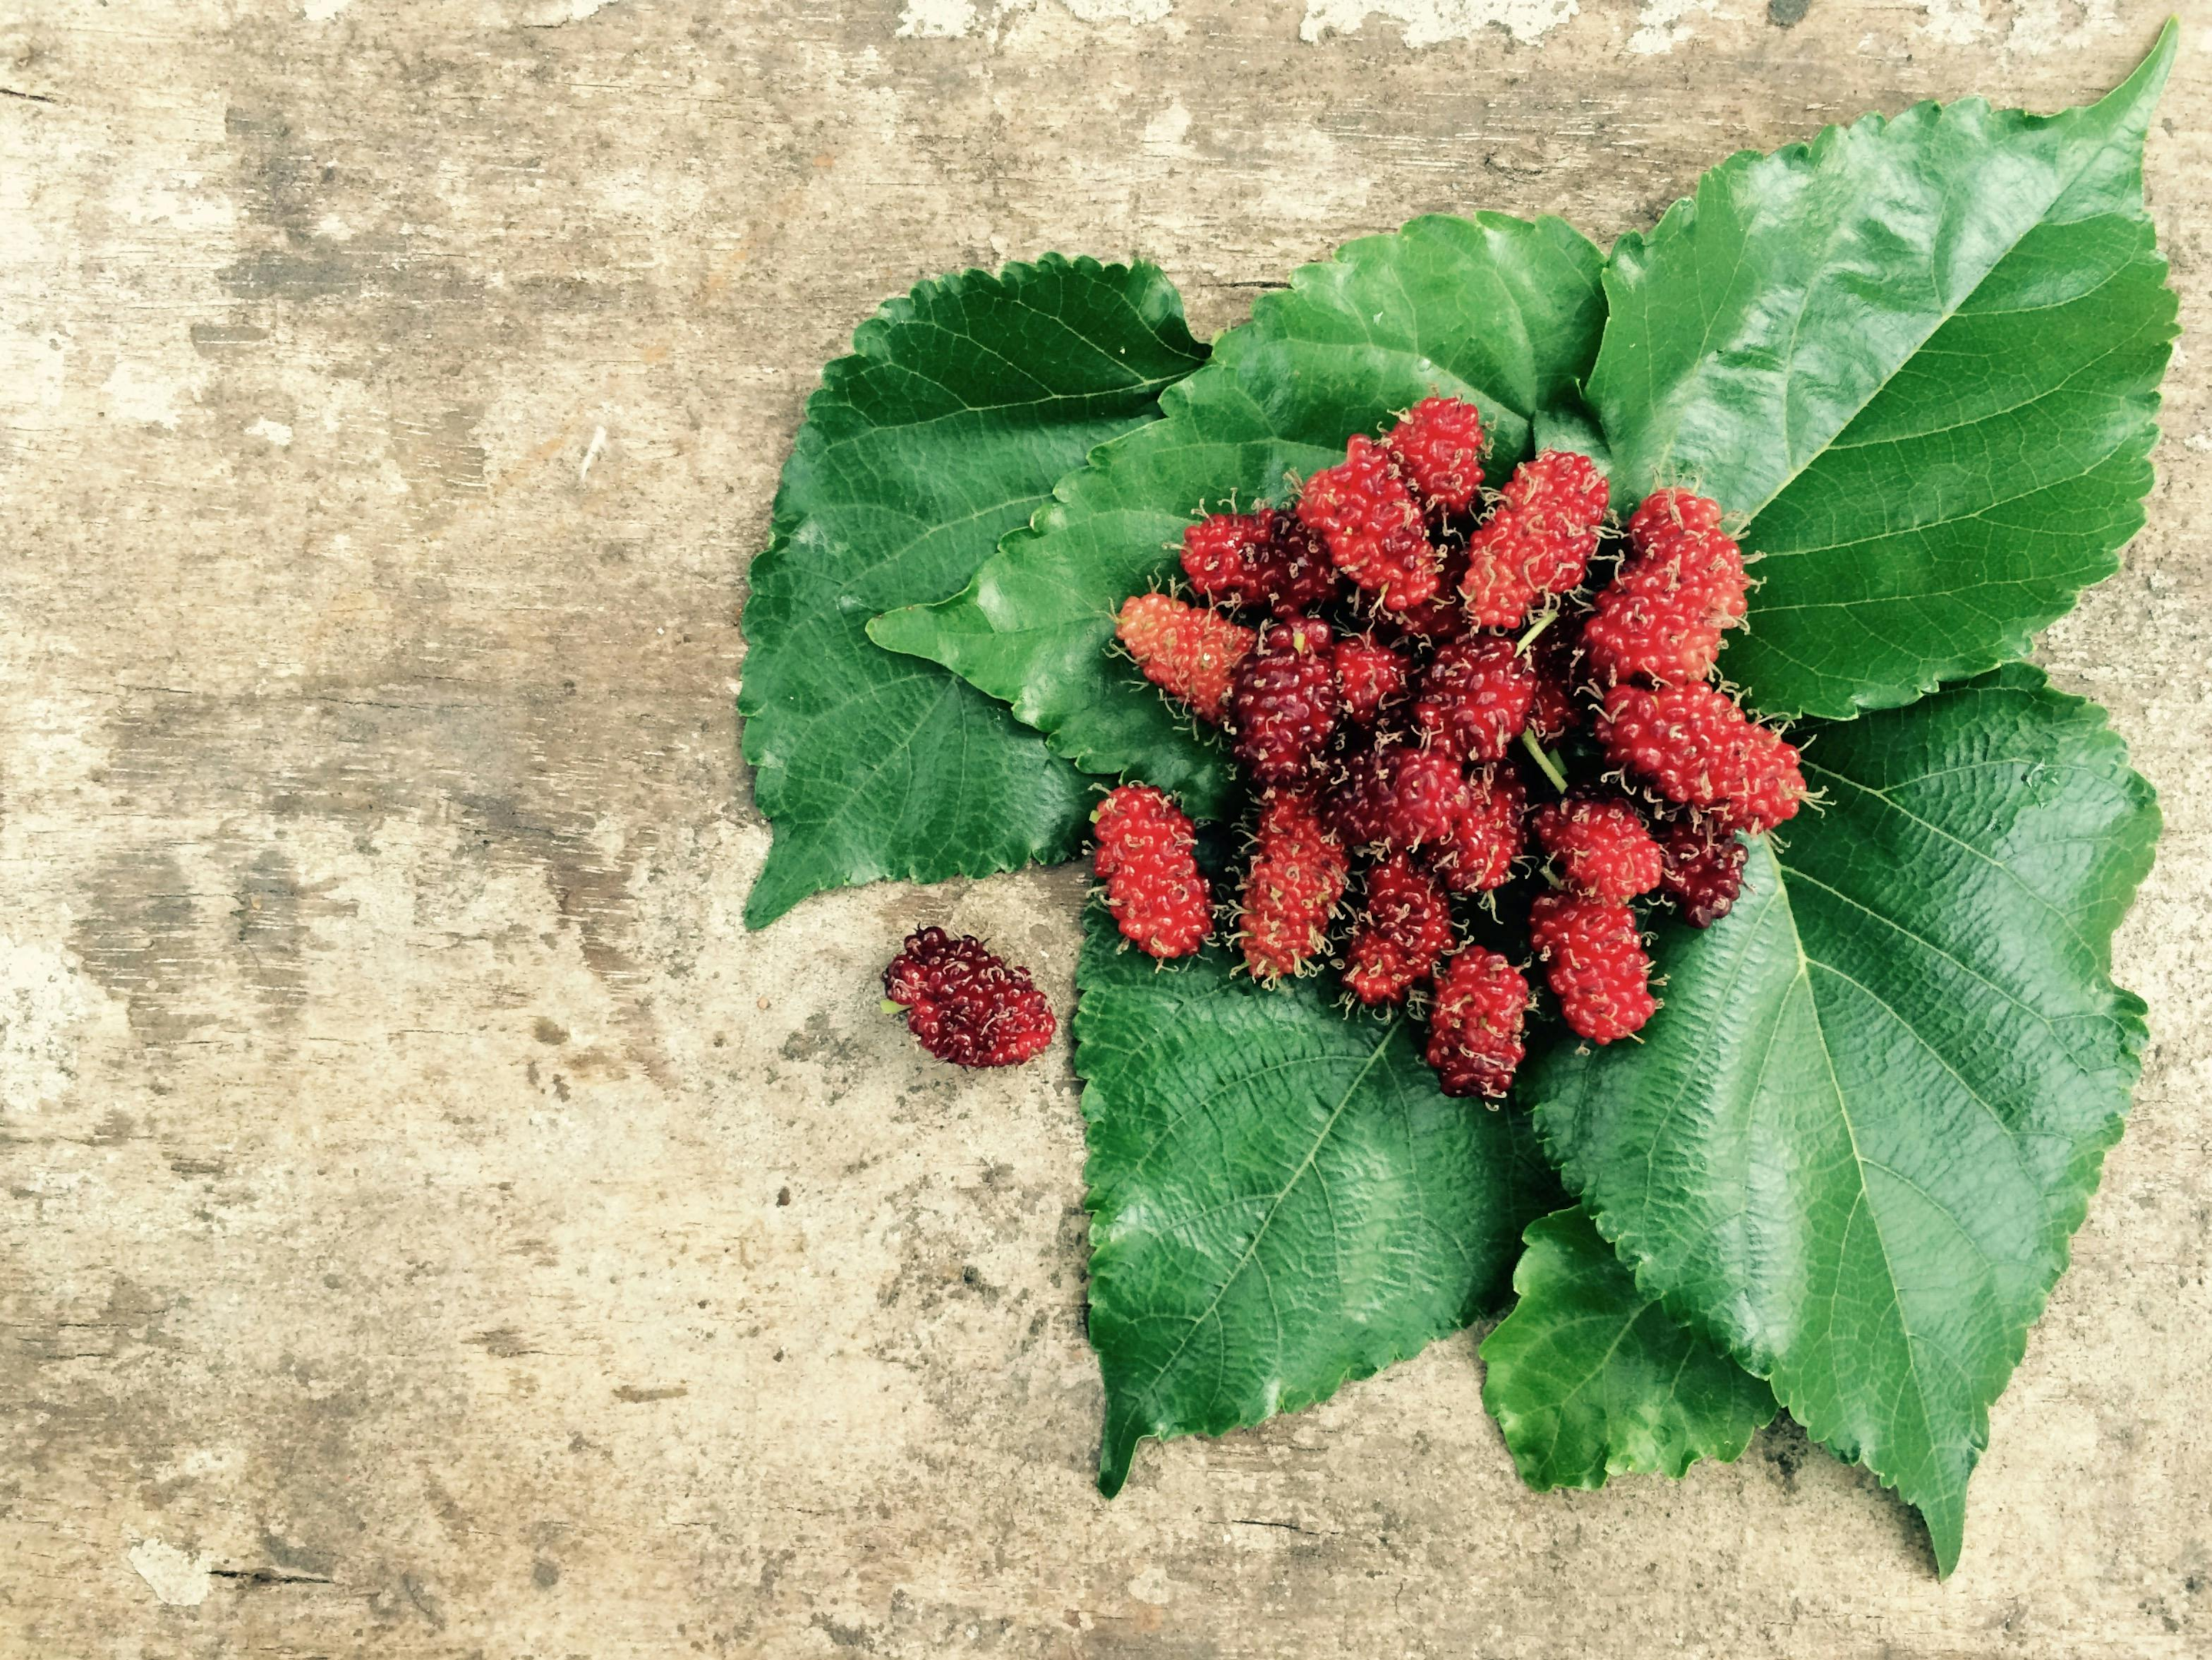 Mulberry fruit, mulberry leaf, and mulberry extracts can have multiple health benefits, including glowing skin.